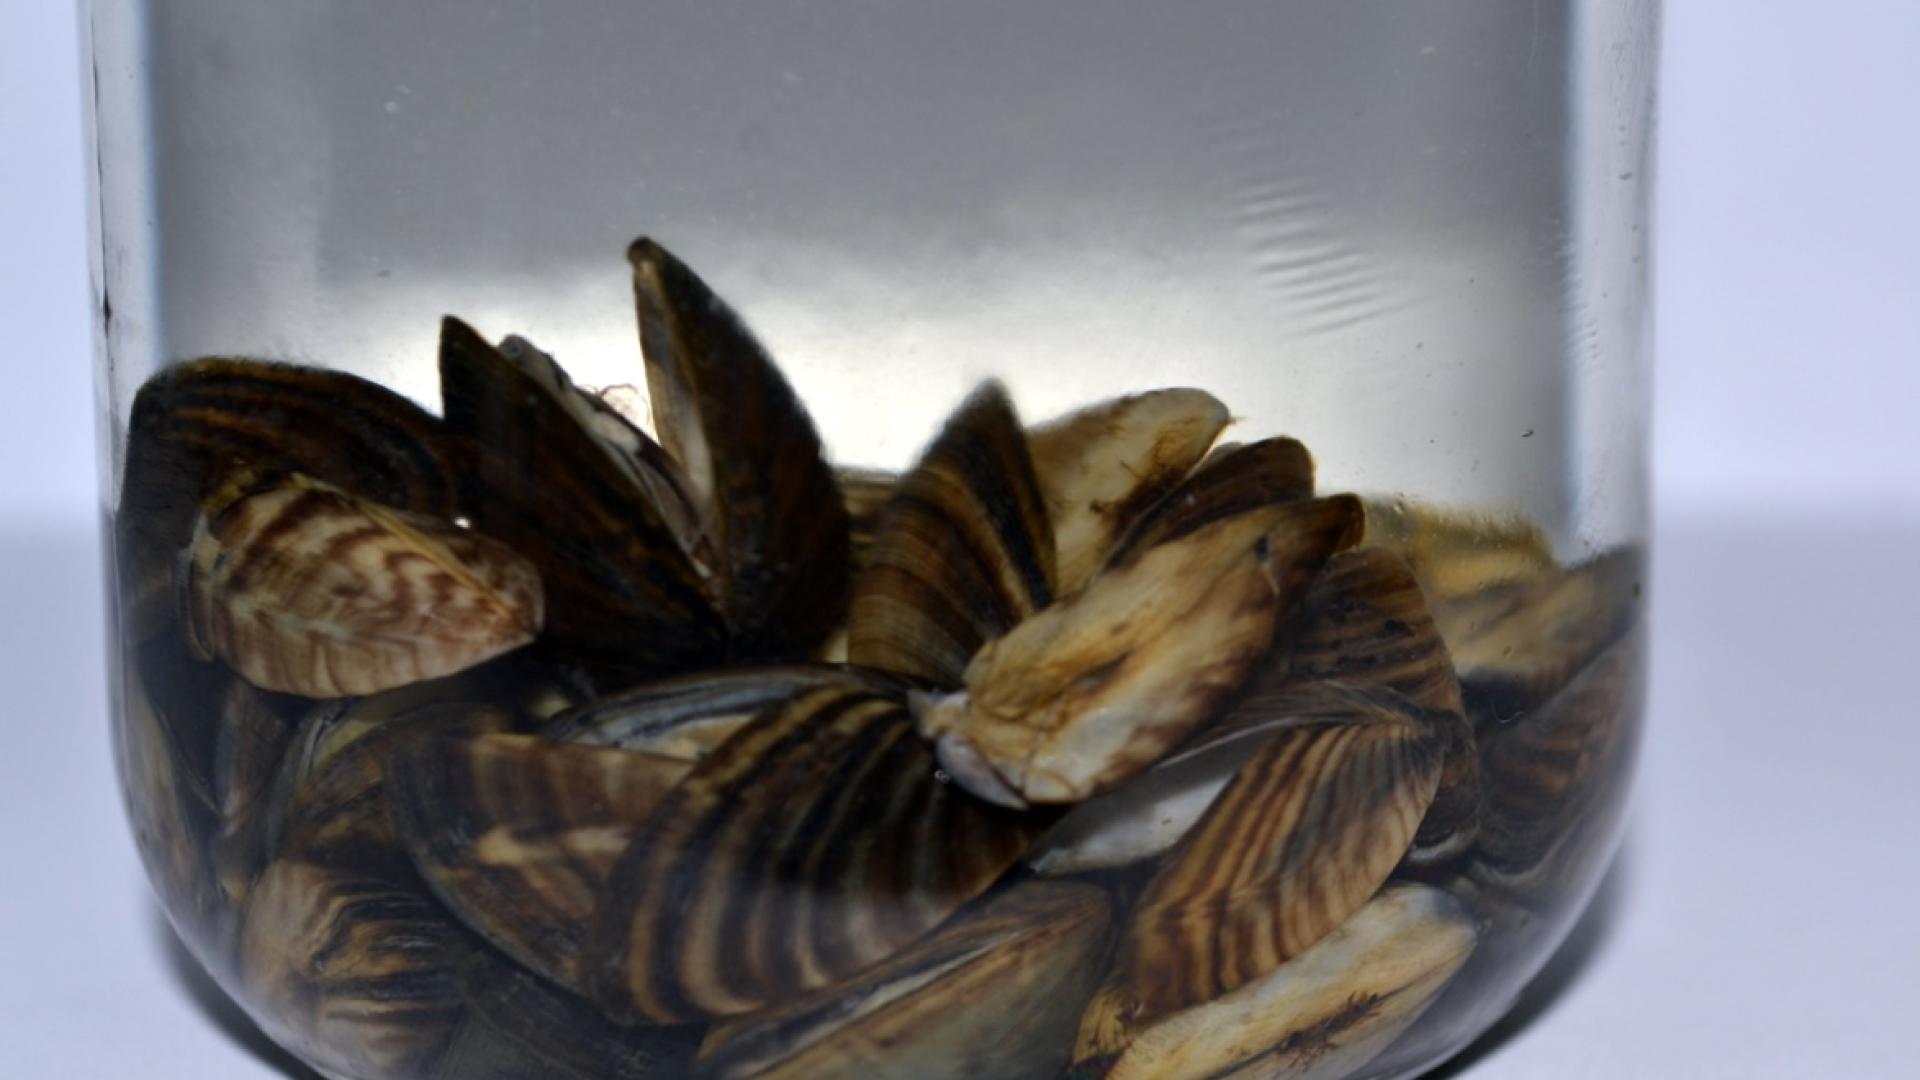 Zebra mussels in a container